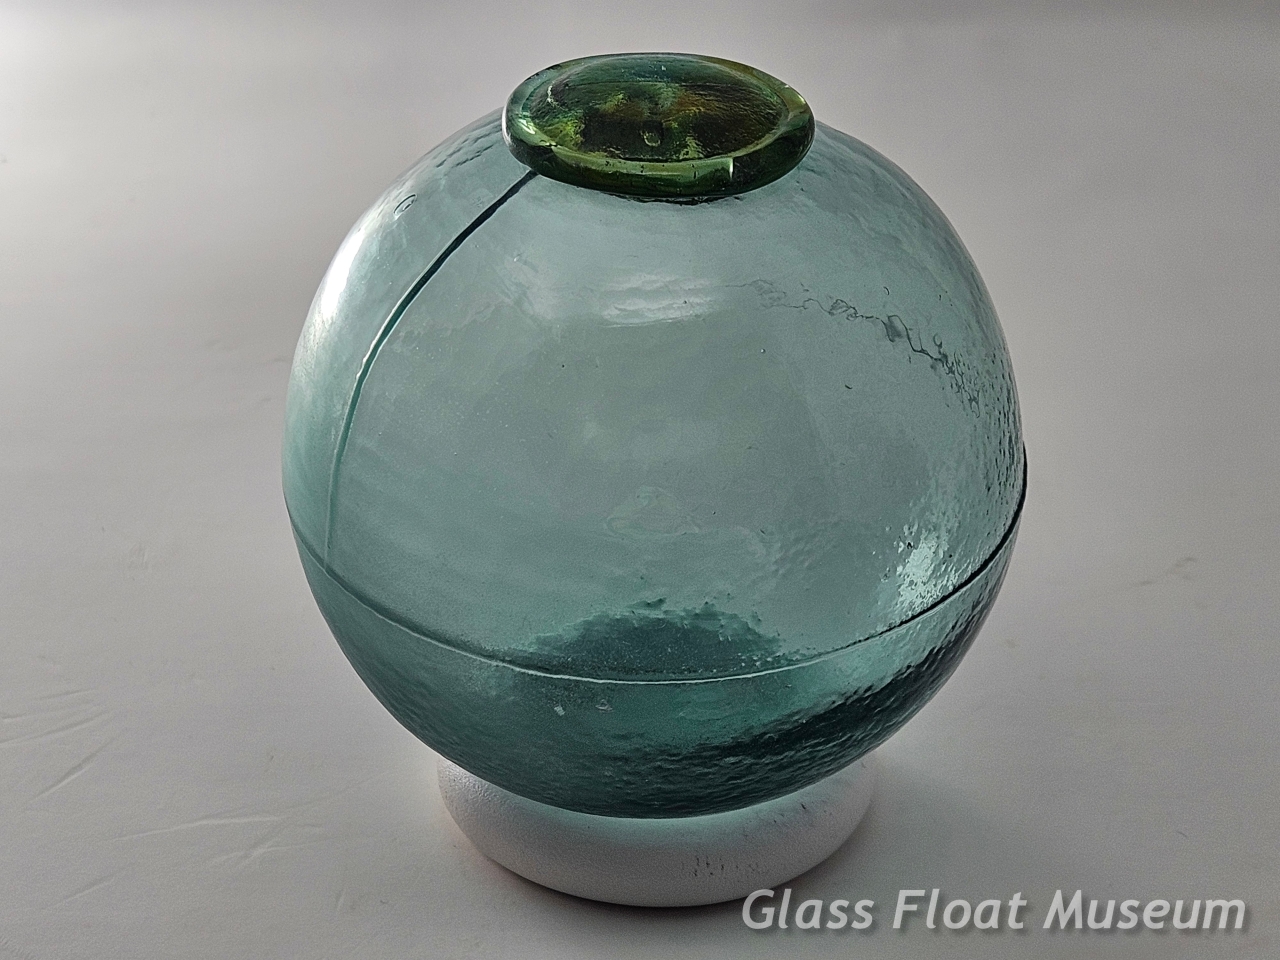 Glass Float Junkie: Some Floats from My Collection